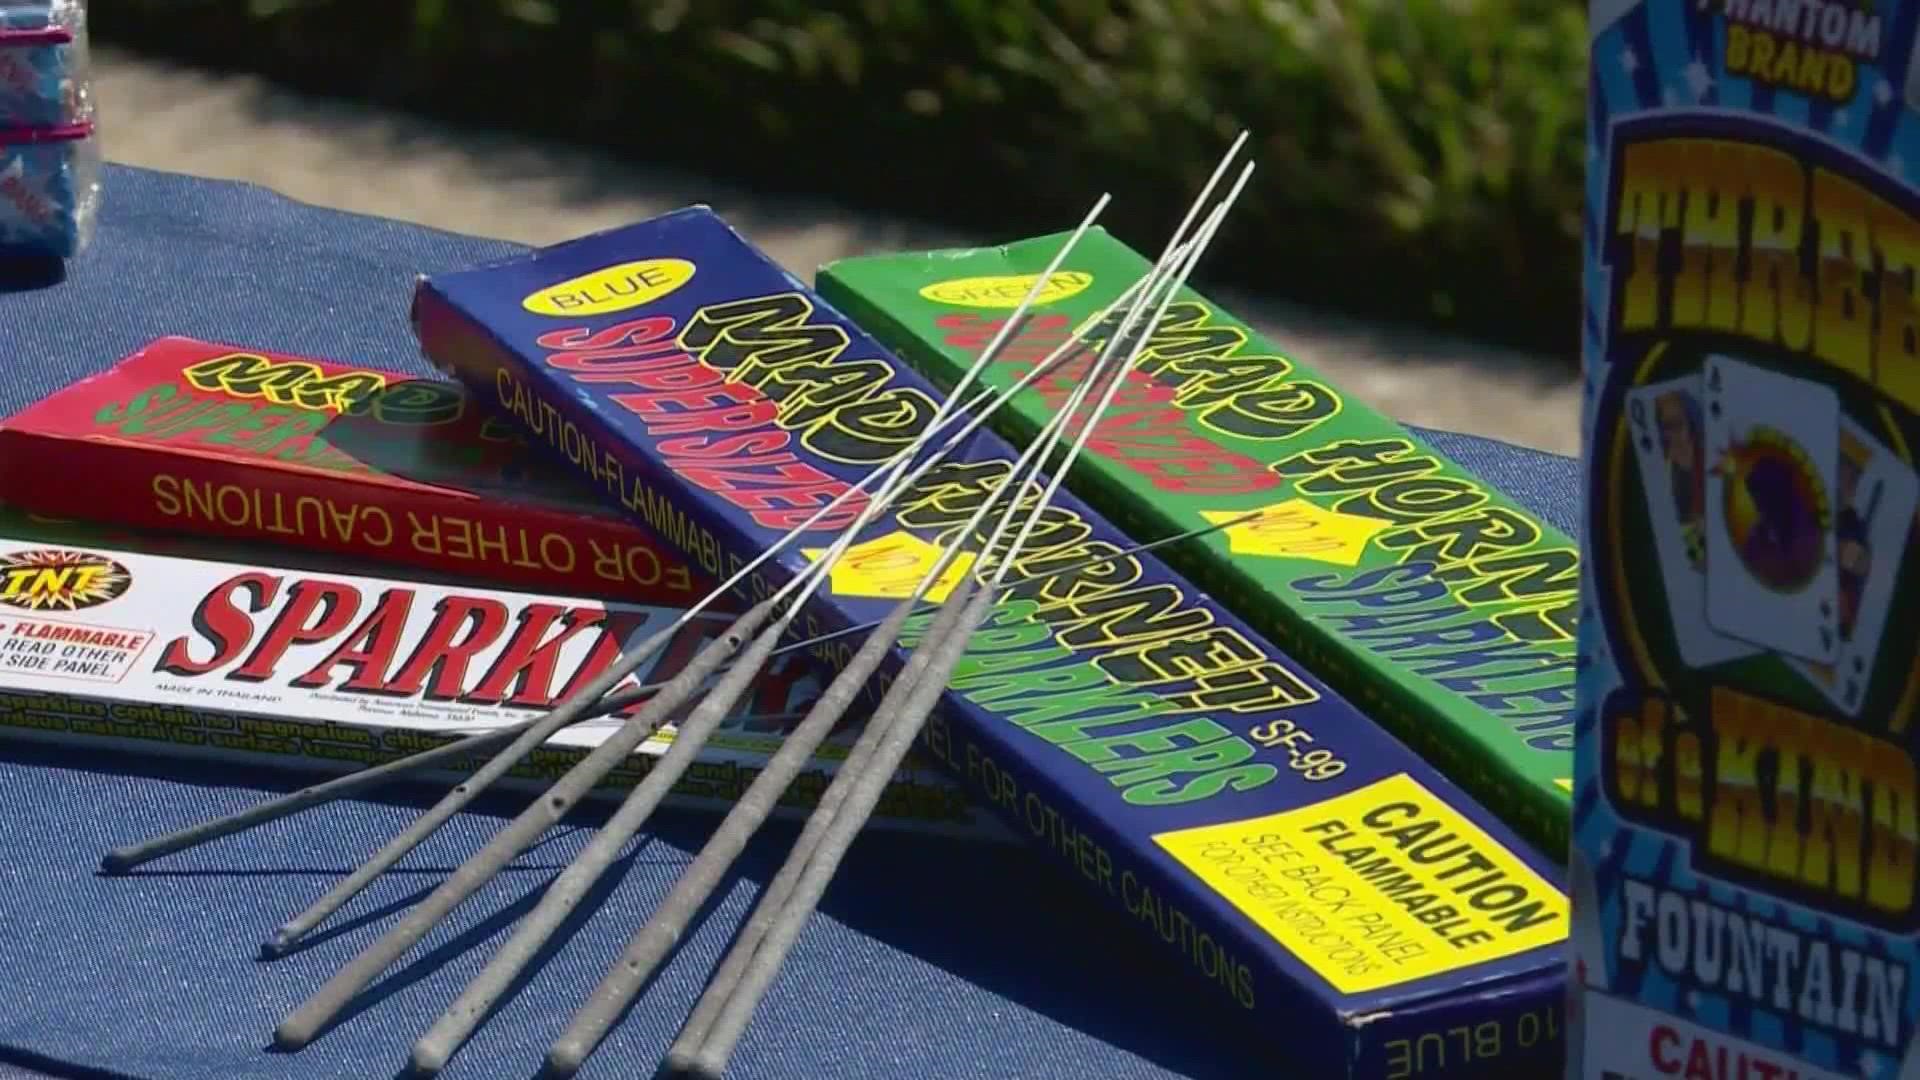 In many areas of Spokane County, illegal possession or use of fireworks can result in infractions of more than $500 for each violation.